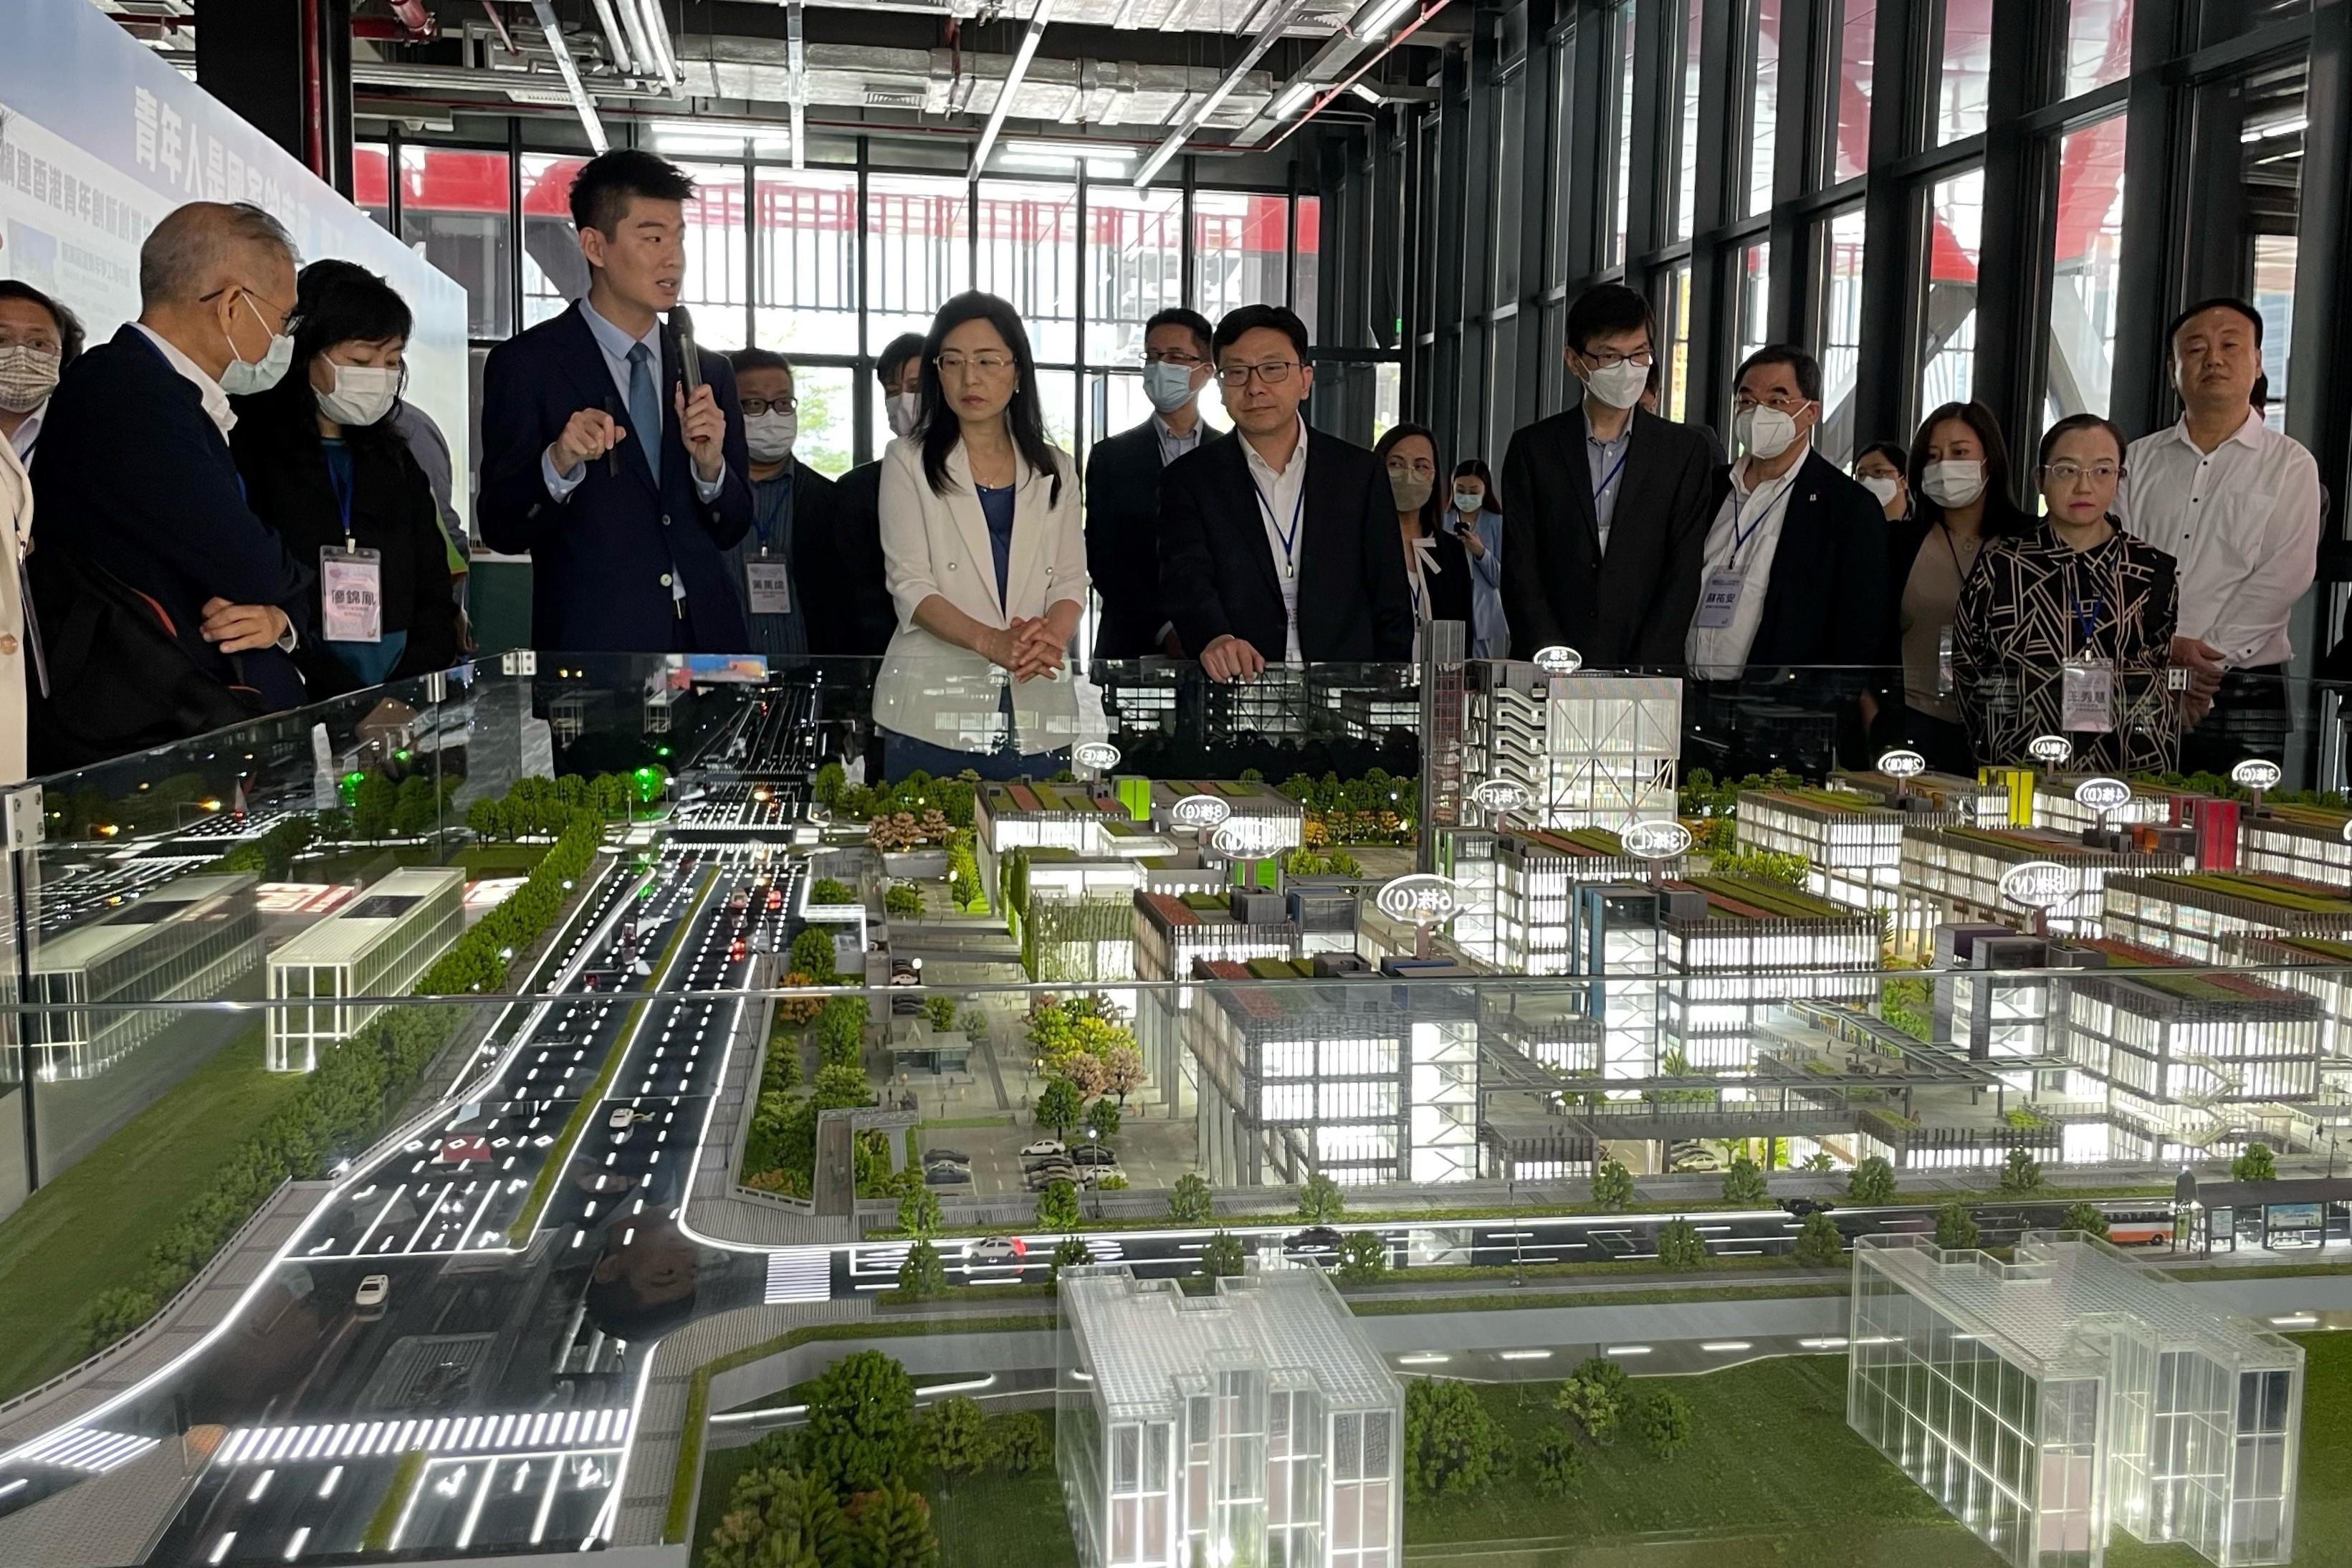 The Secretary for Labour and Welfare, Mr Chris Sun, led the Hong Kong social welfare sector delegation in a visit to Guangdong and visited the Qianhai Shenzhen-Hong Kong Youth Innovation and Entrepreneur Hub this morning (April 24). Photo shows Mr Sun (front row, fifth left) being briefed on start-up companies in the Hub and its entrepreneurial support for youths.